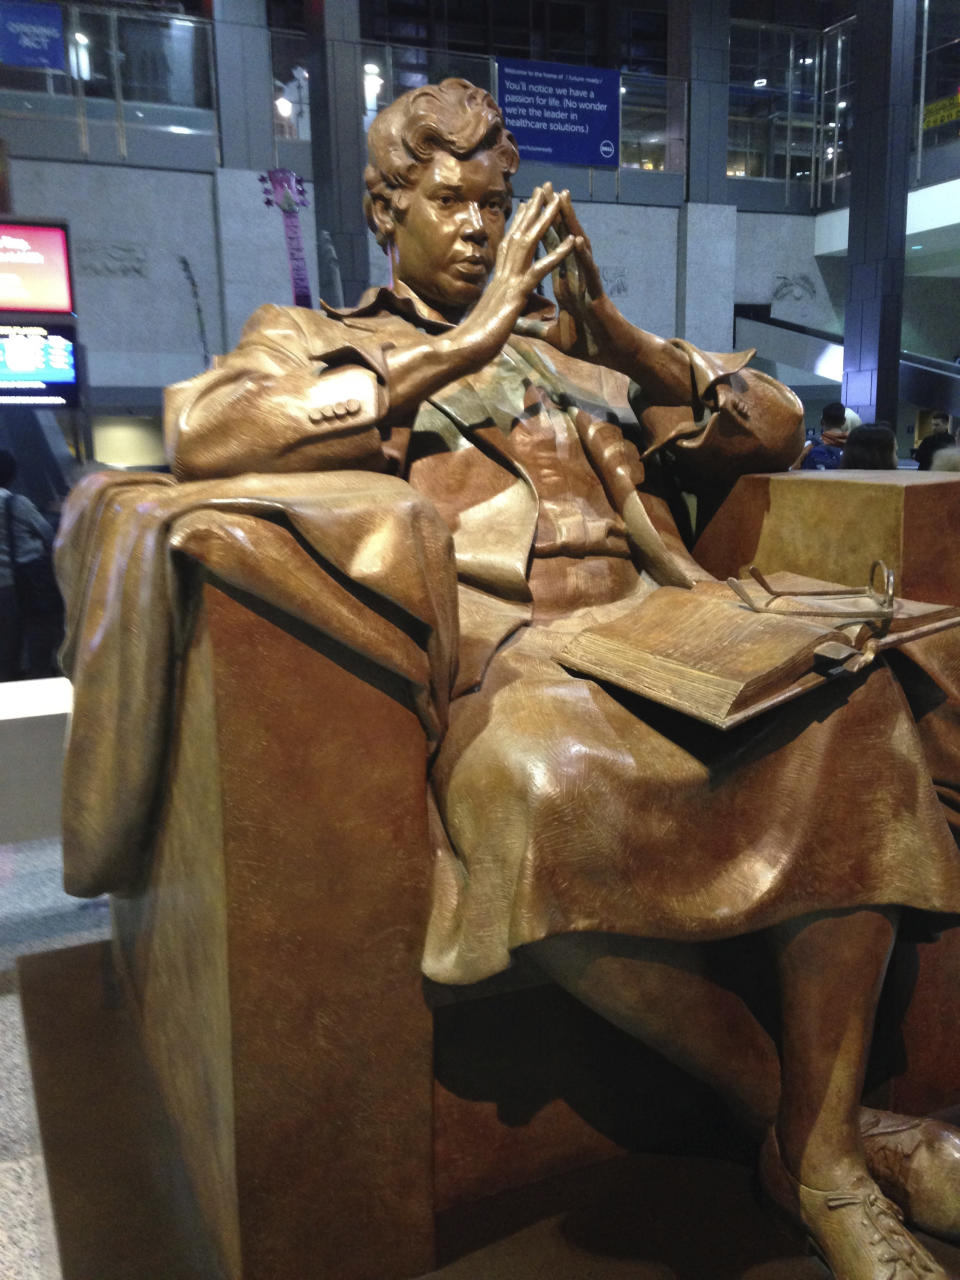 In this Nov. 18, 2015 photo, a statue of former U.S. Rep. Barbara Jordan, the first African American elected to the Texas Senate after Reconstruction and the first Southern African-American woman elected to the U.S. House of Representatives, sits at the Austin-Bergstrom International Airport in Austin, Texas. Jordan is another figure who activists say needs to be honored. (AP Photo/ Russell Contreras)